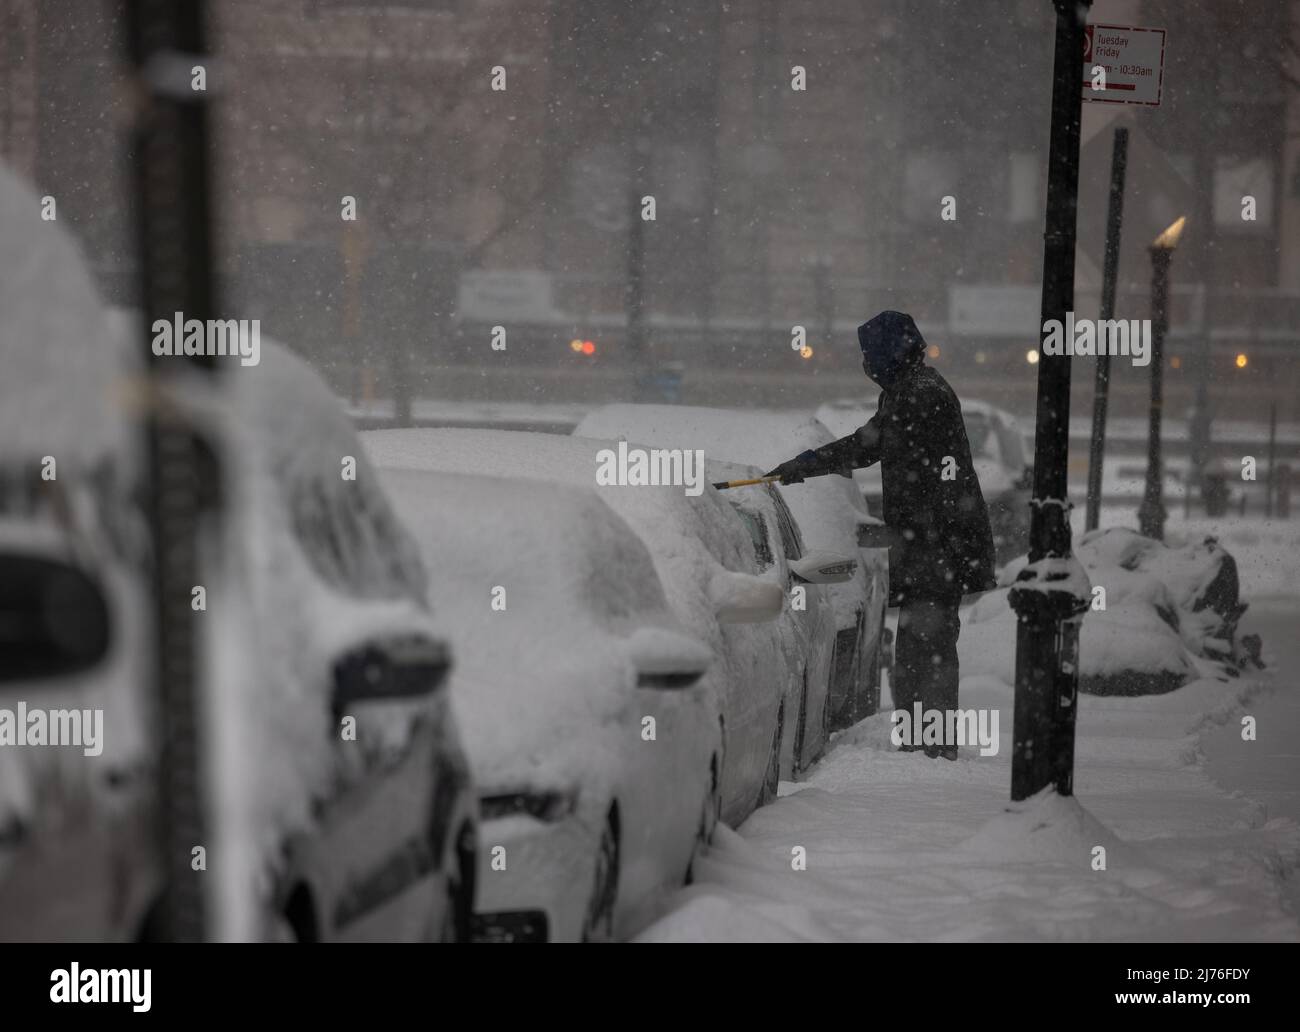 NEW YORK, N.Y. – February 1, 2021: A person removes snow from a vehicle in Battery Park City during a winter storm. Stock Photo